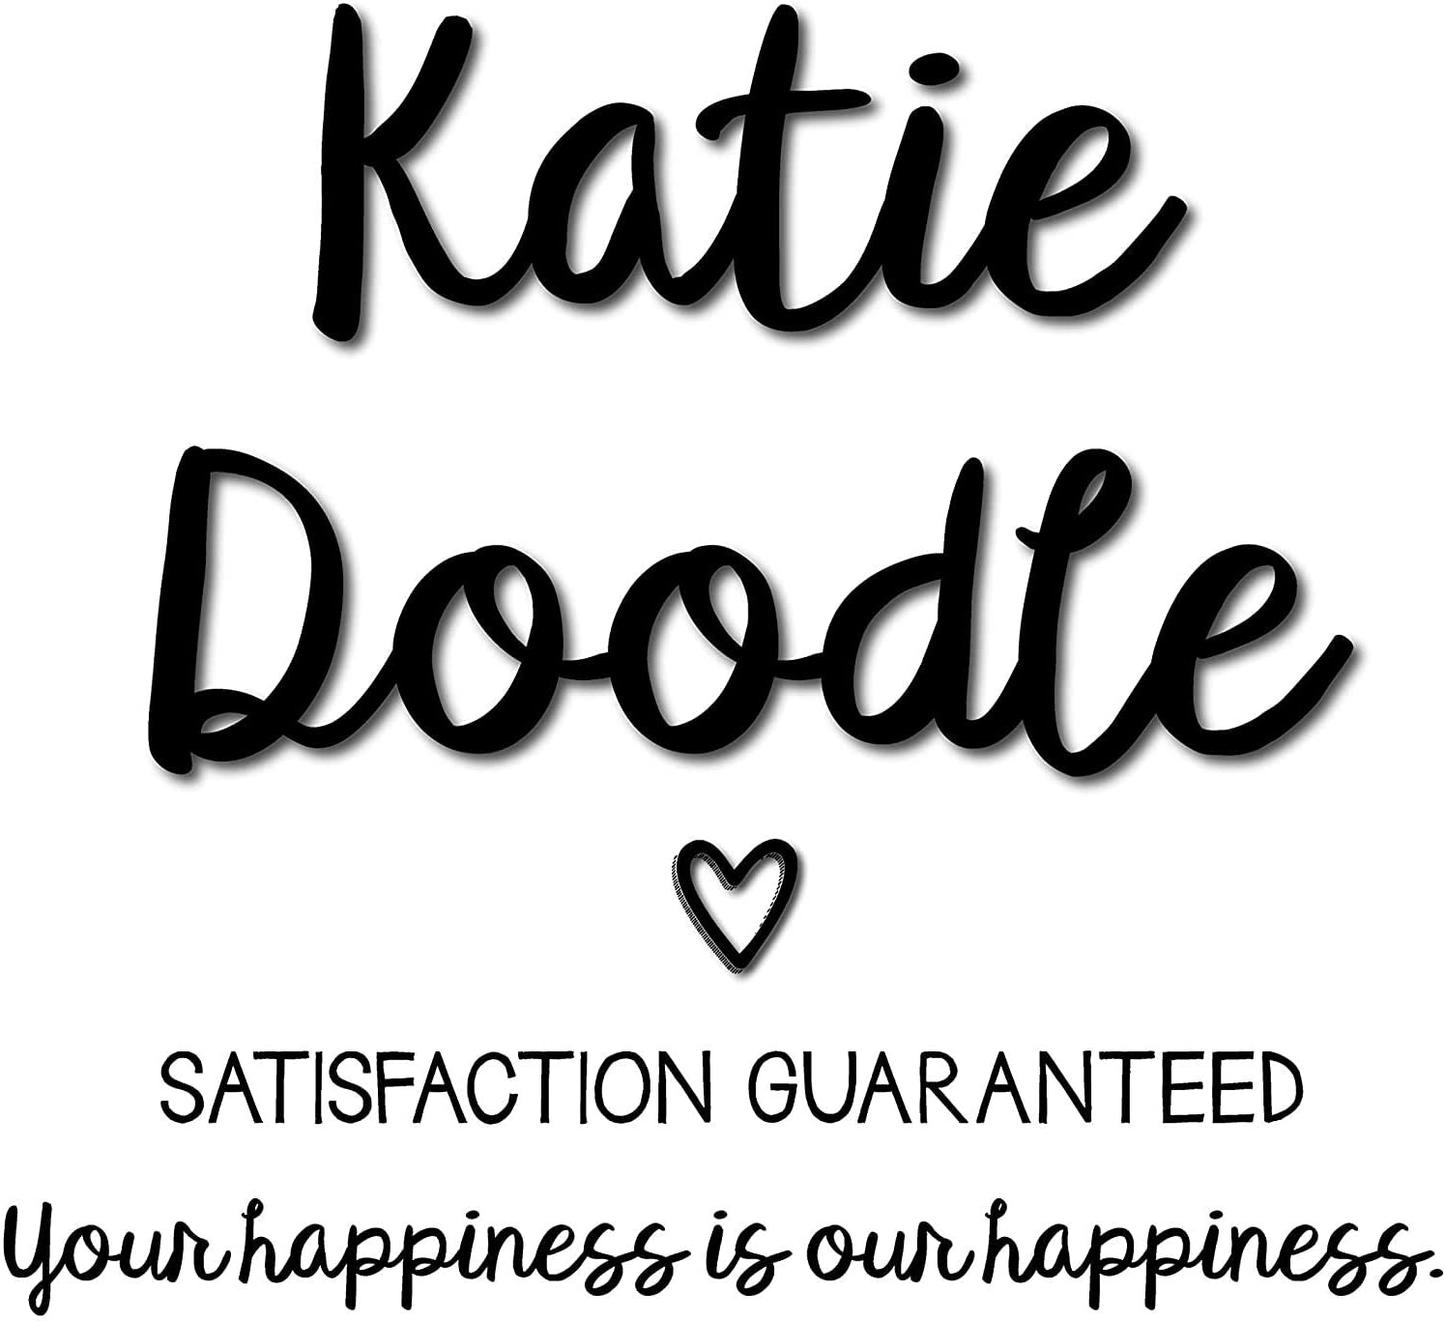 Katie Doodle Thank You Card - Single Jumbo Thank You Card Sign for First Responders, Nurse, Teacher, Coach, Boss - Great Appreciation Gift from Co-Workers, Office or Class - 11x17 Poster [Unframed]